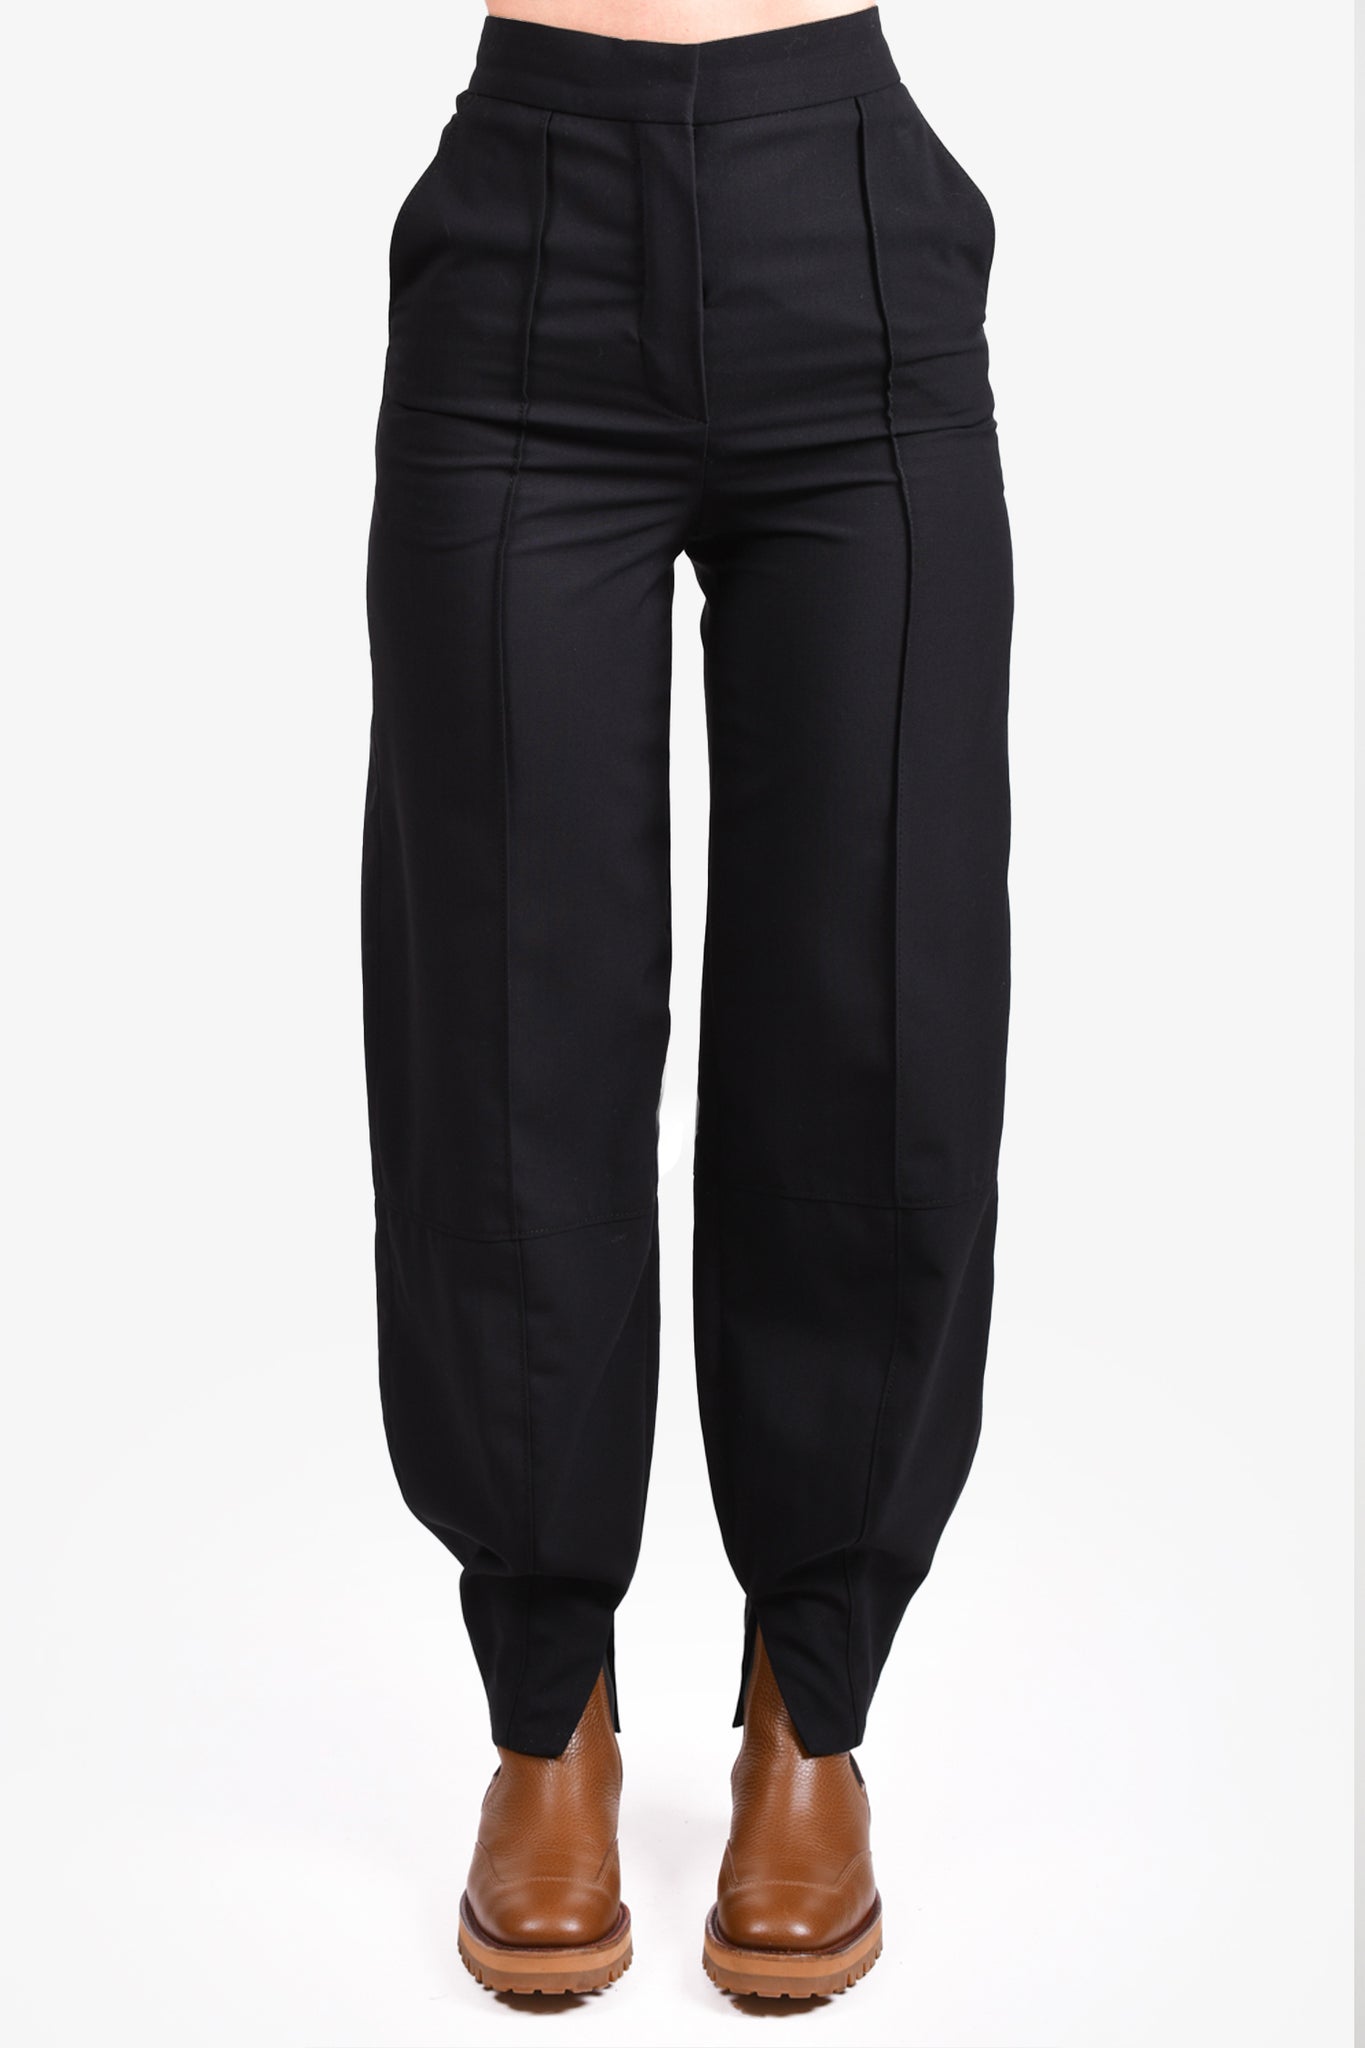 Formal Trousers & Hight Waist Pants - 32/36 - Men - 2 products | FASHIOLA.in